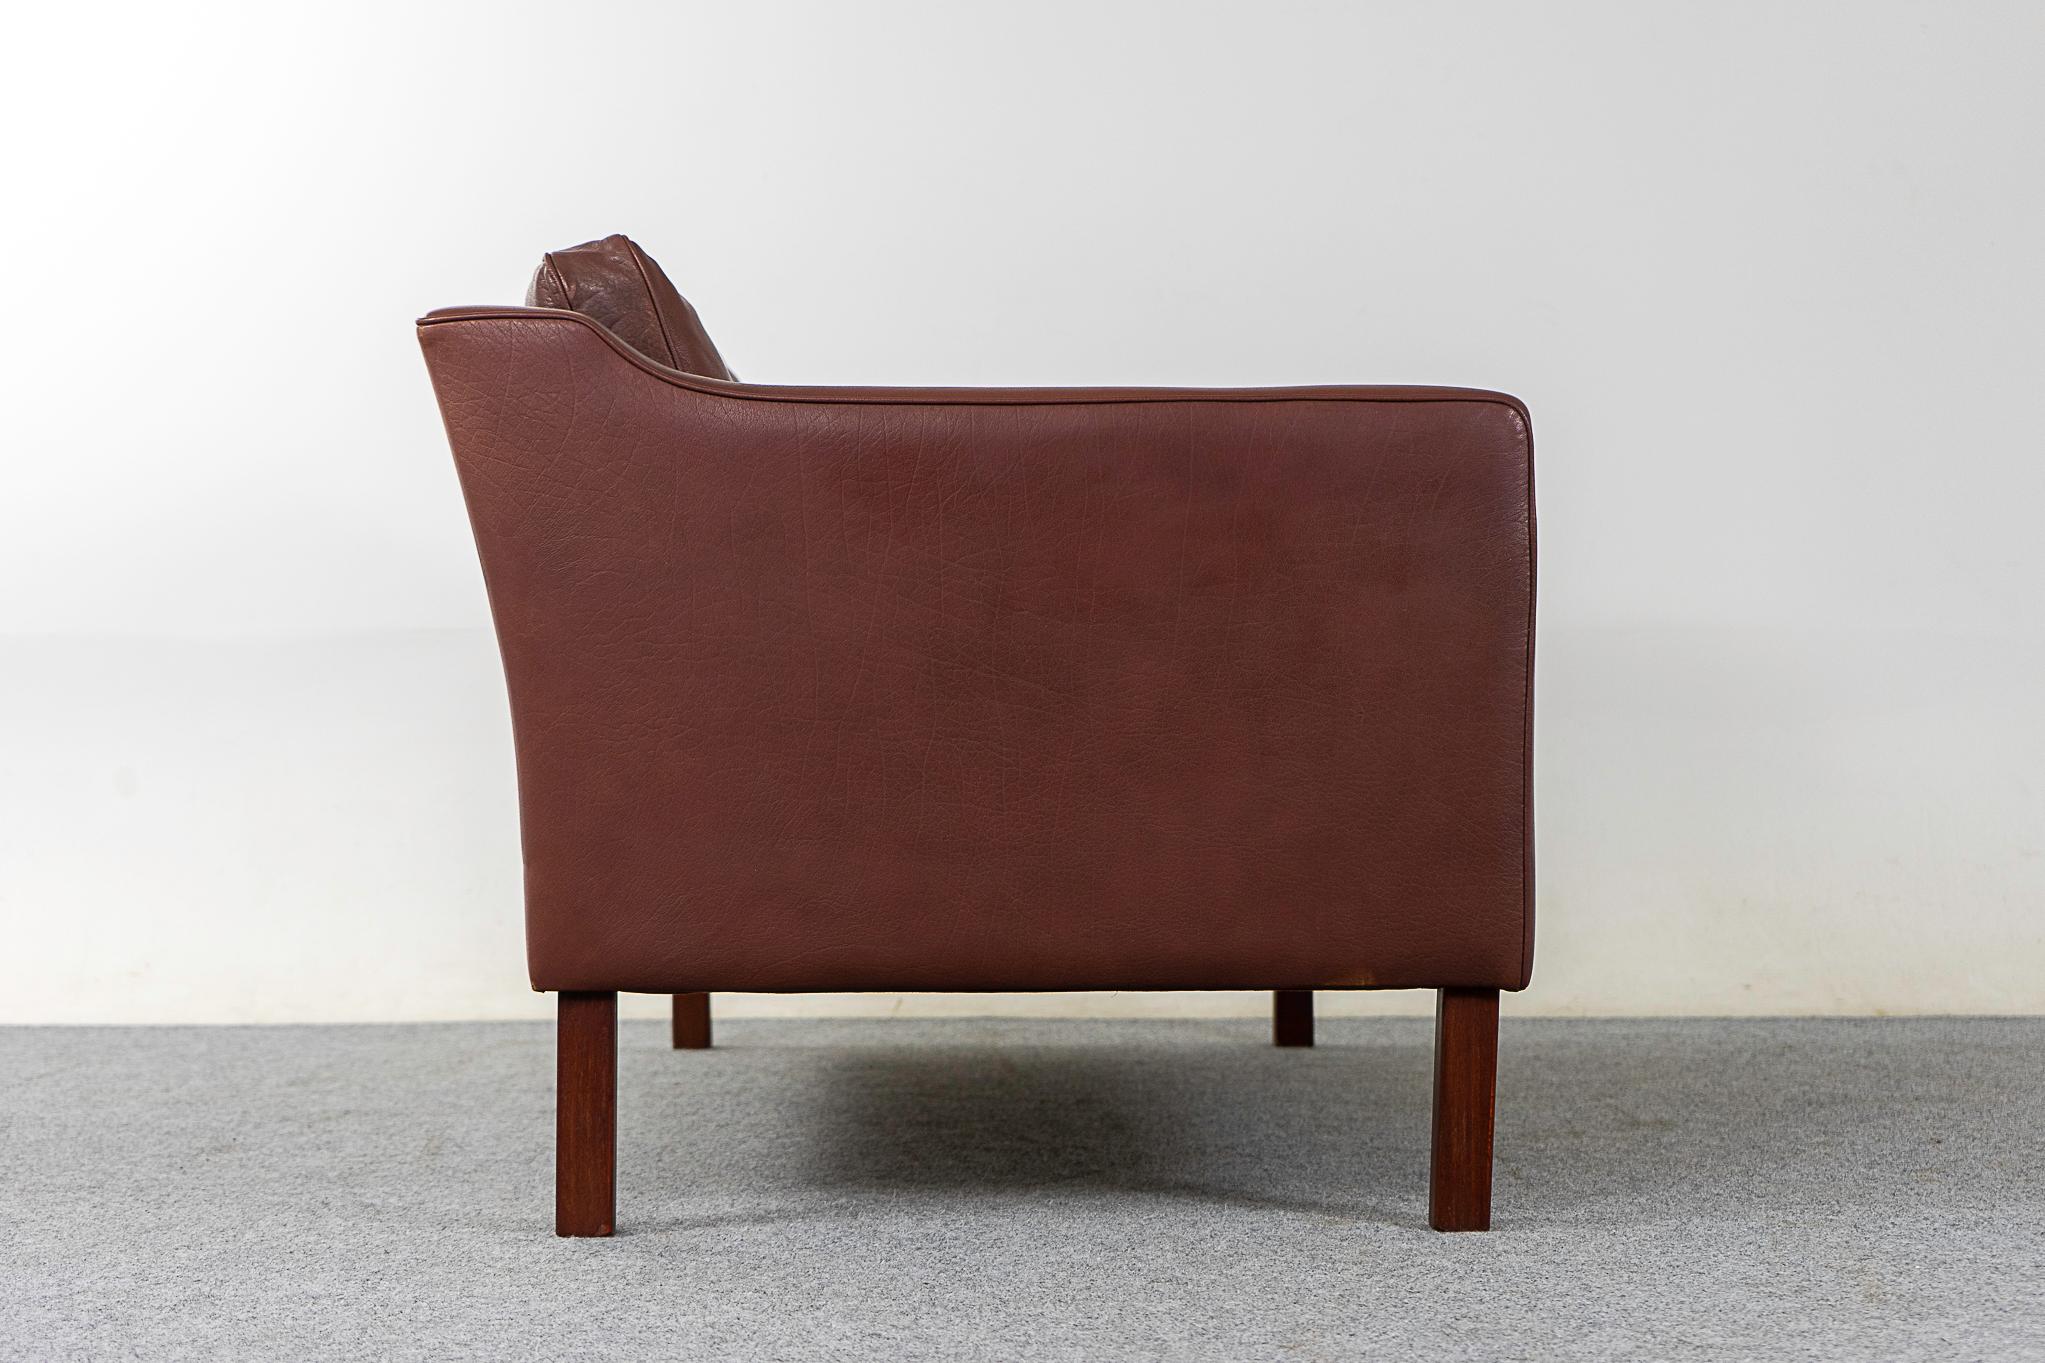 Mid-20th Century Danish Modern Brown Leather Loveseat For Sale